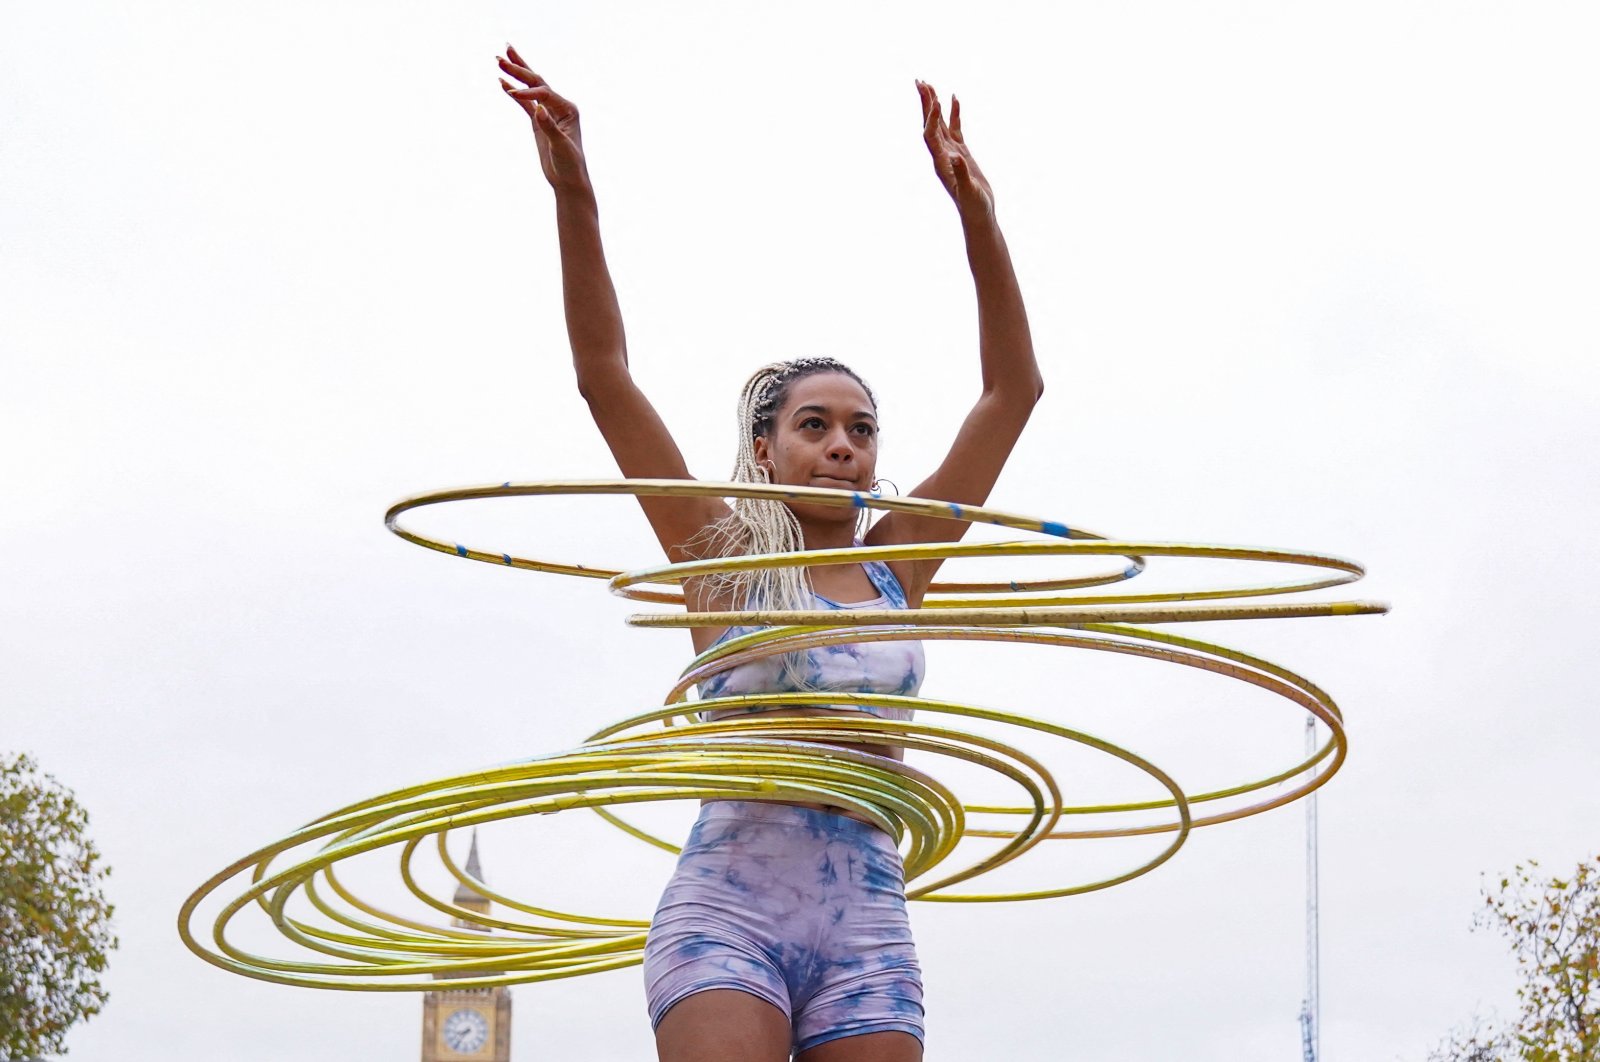 Mariam Olayiwola, also known as Amazi, attempts to break the Guinness World Record for spinning the most hula hoops simultaneously whilst on stilts, in London, U.K., Nov. 10, 2022. (Reuters Photo)